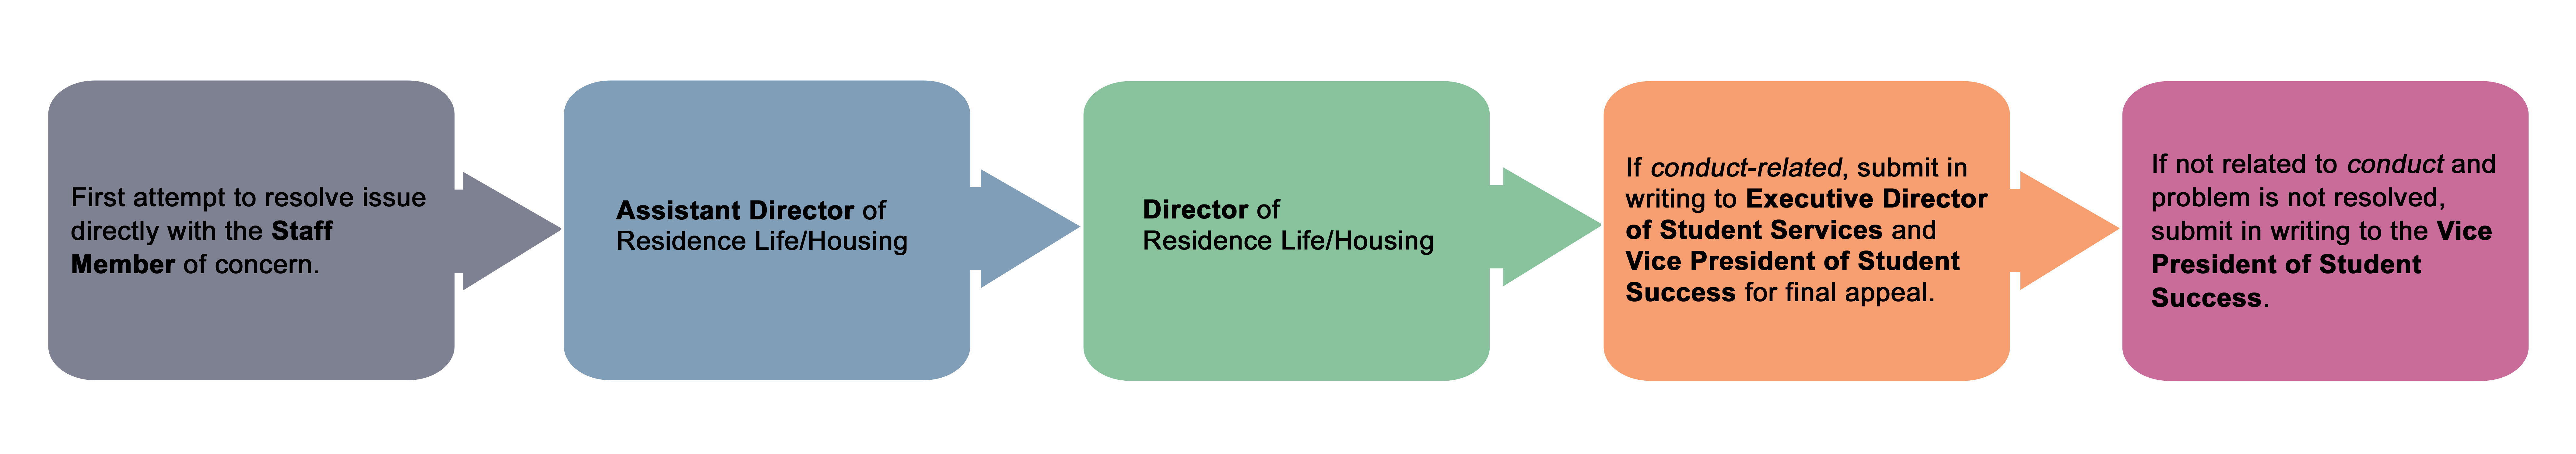 Student Grievance Residence Life/Housing Chart